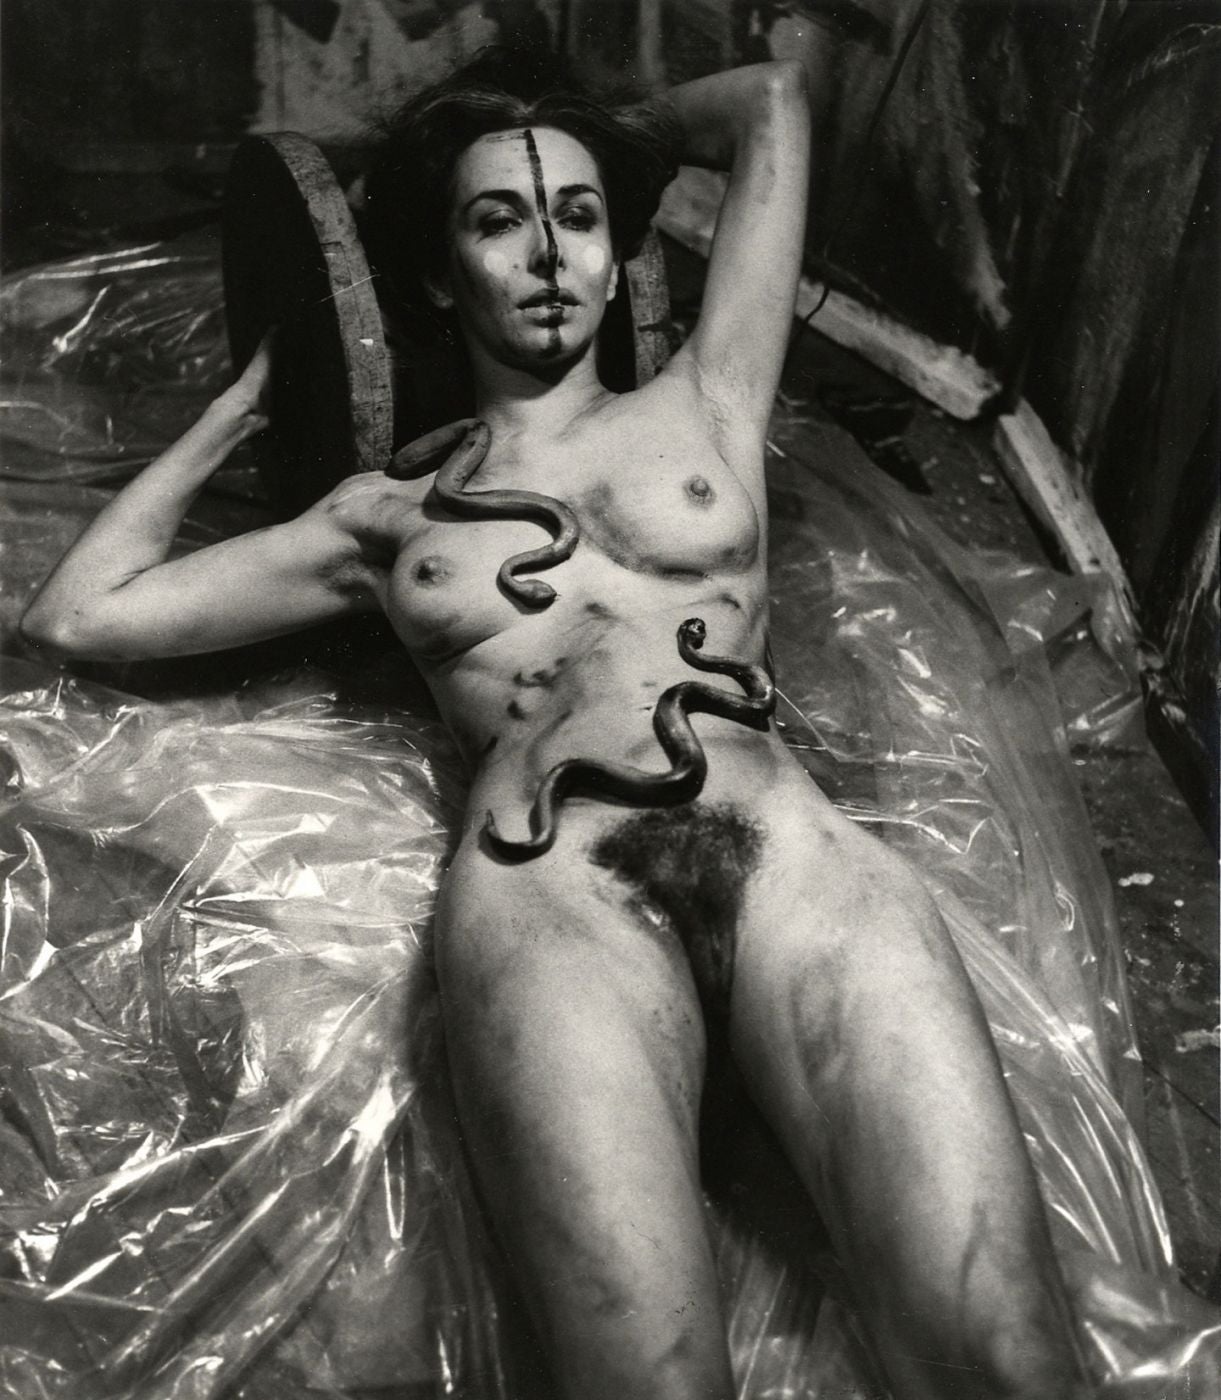 Carolee Schneemann: Imaging Her Erotics -- Essays, Interviews, Projects, Limited Edition (with 2 Prints)